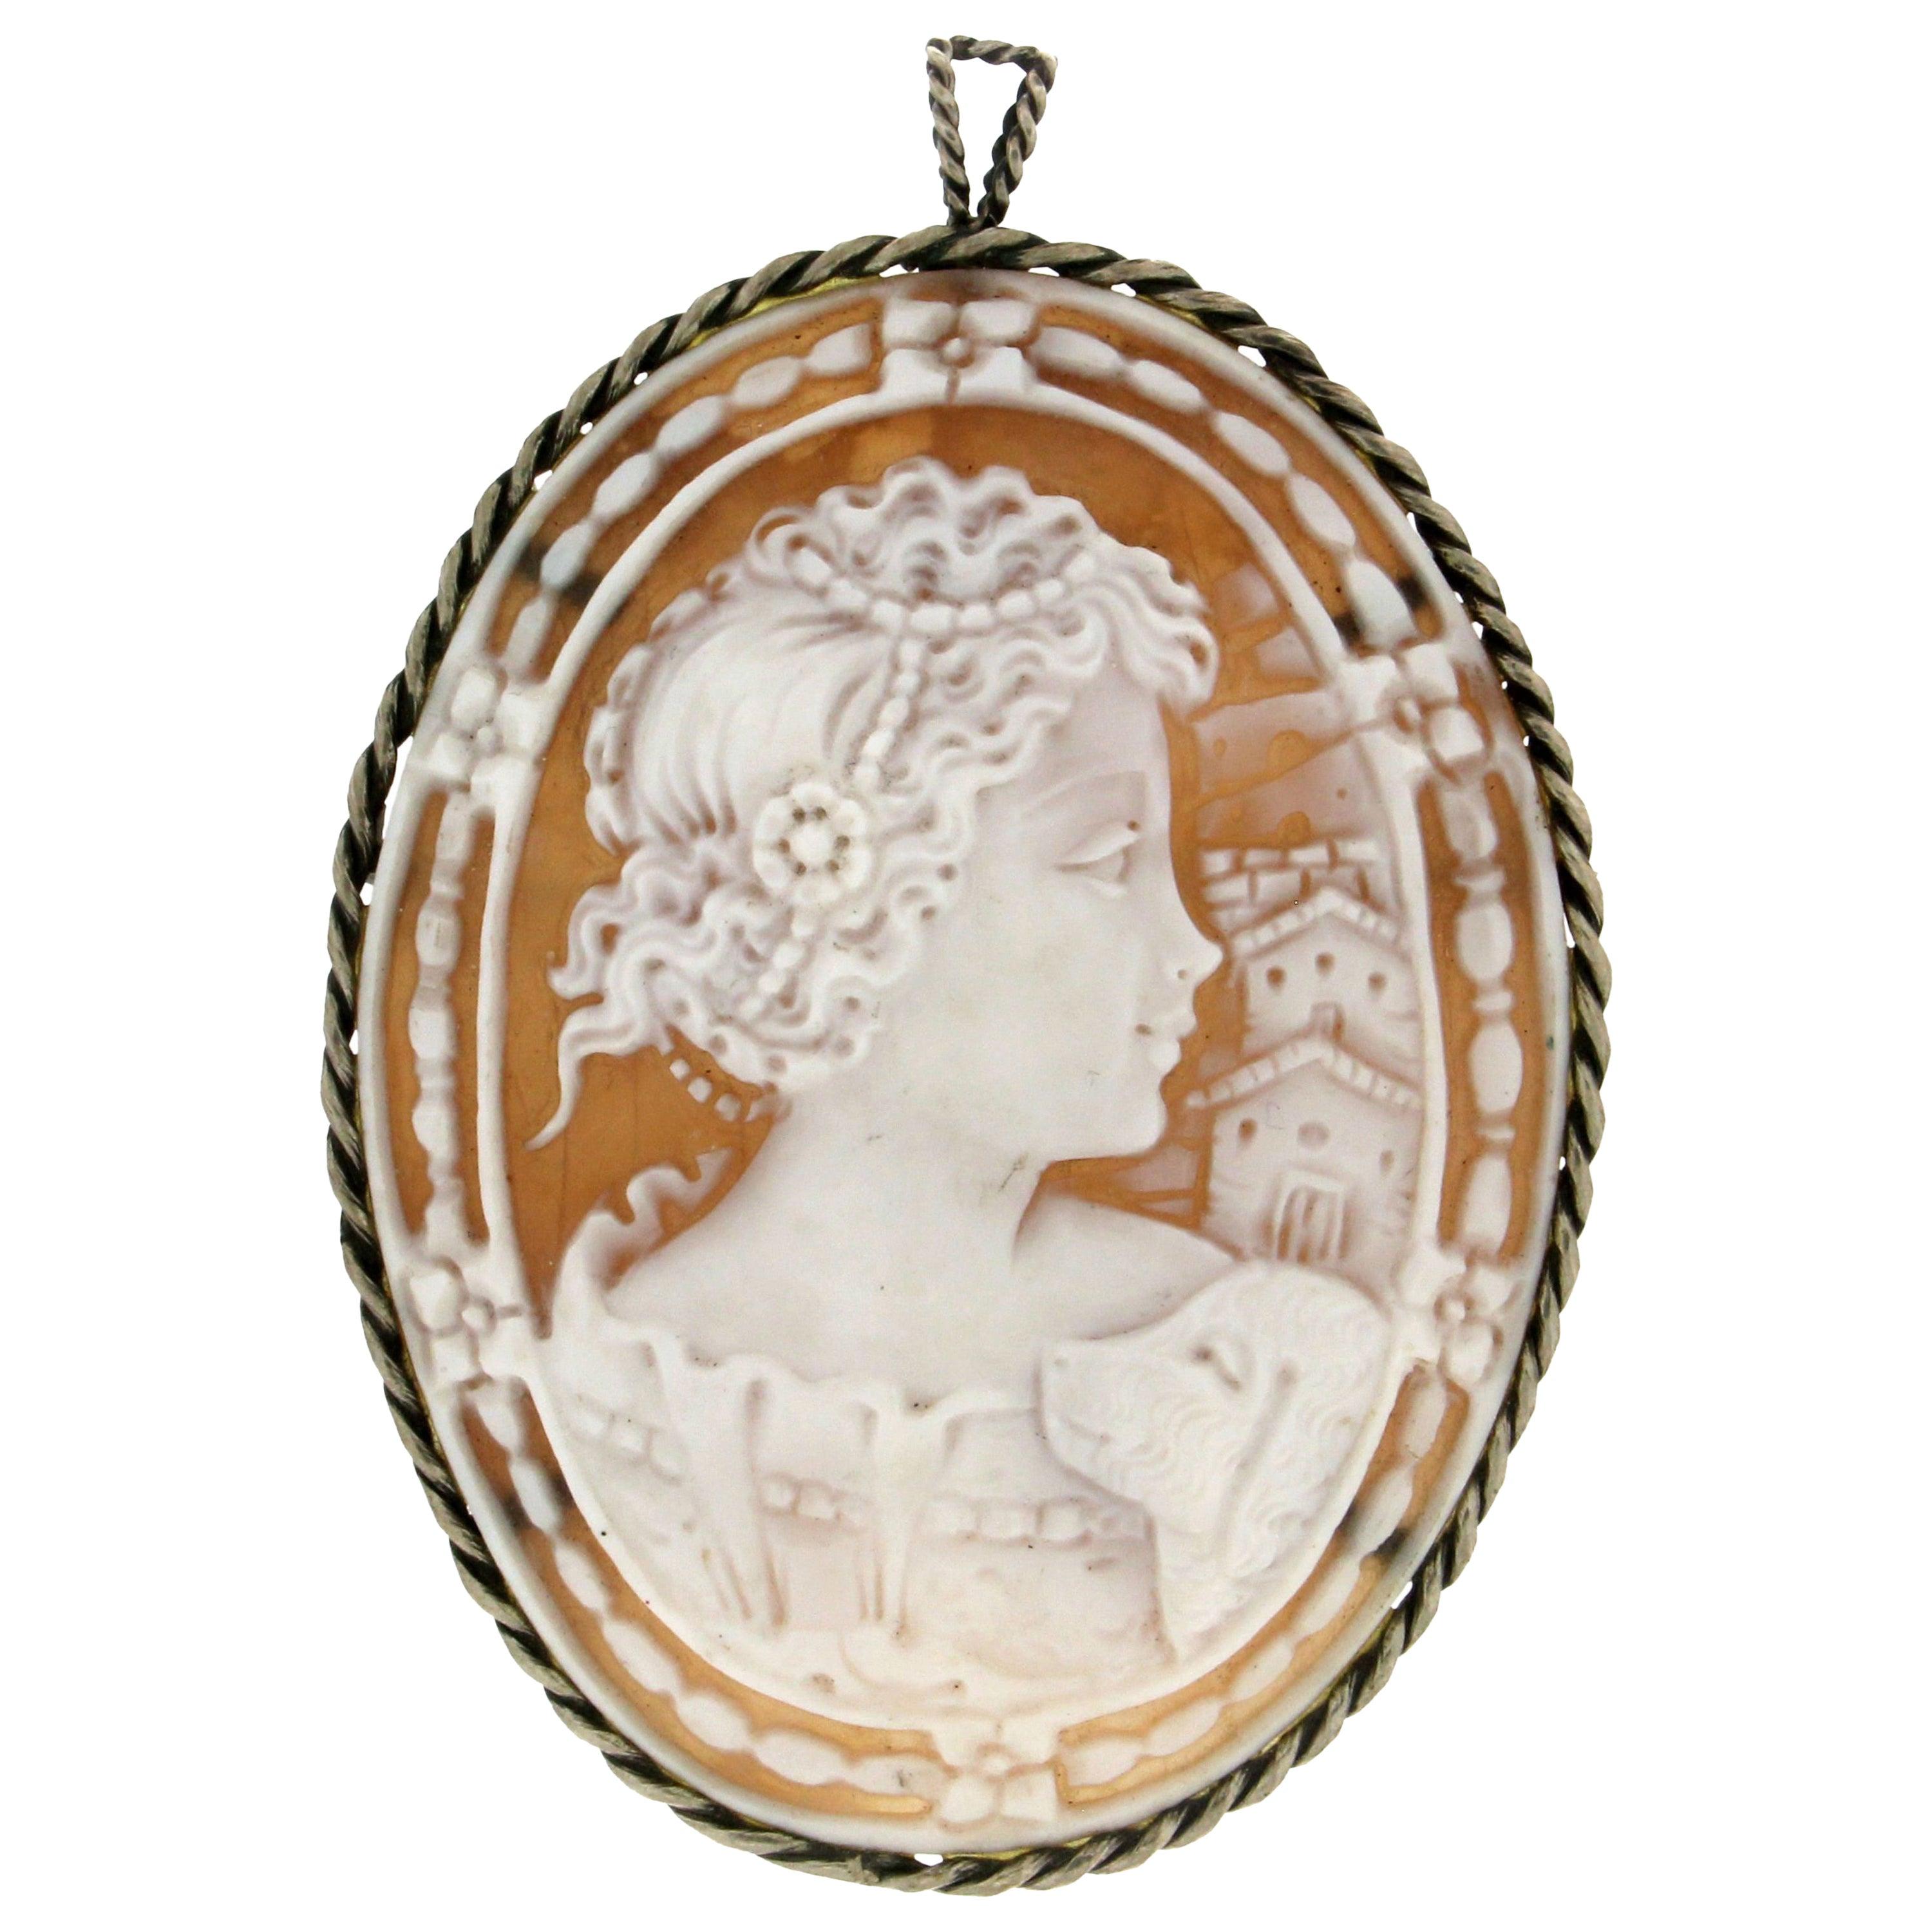 Handcraft Cameo 800 Thousandths Silver Brooch and Pendant Necklace